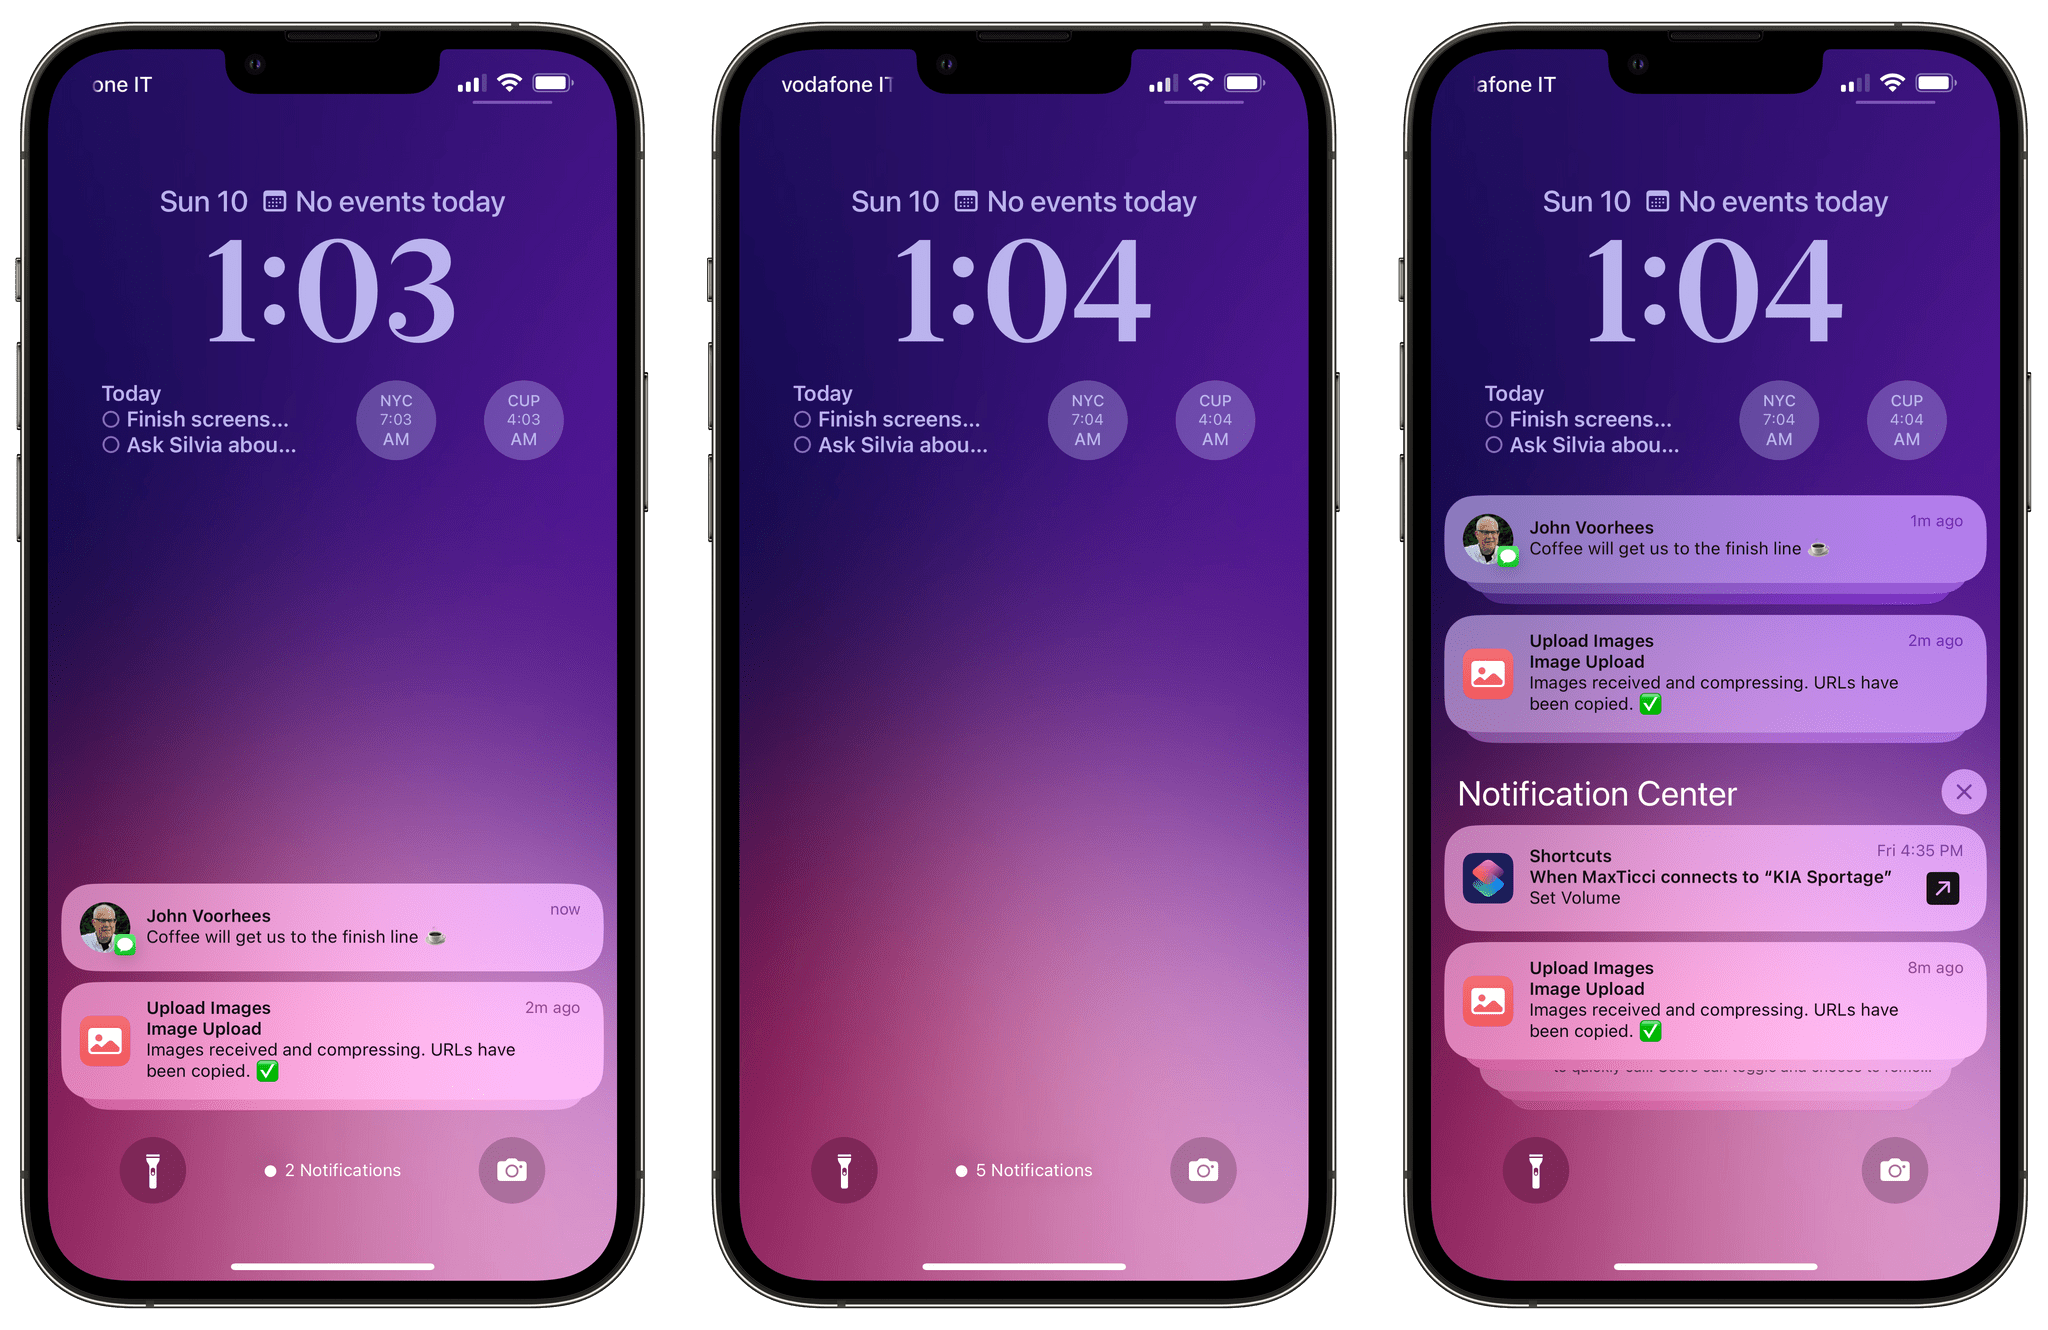 The new Lock Screen in iOS 16. Notifications now roll in at the bottom of the screen (left), can be made more compact with a swipe down (center), and you can still open the full Notification Center (right).